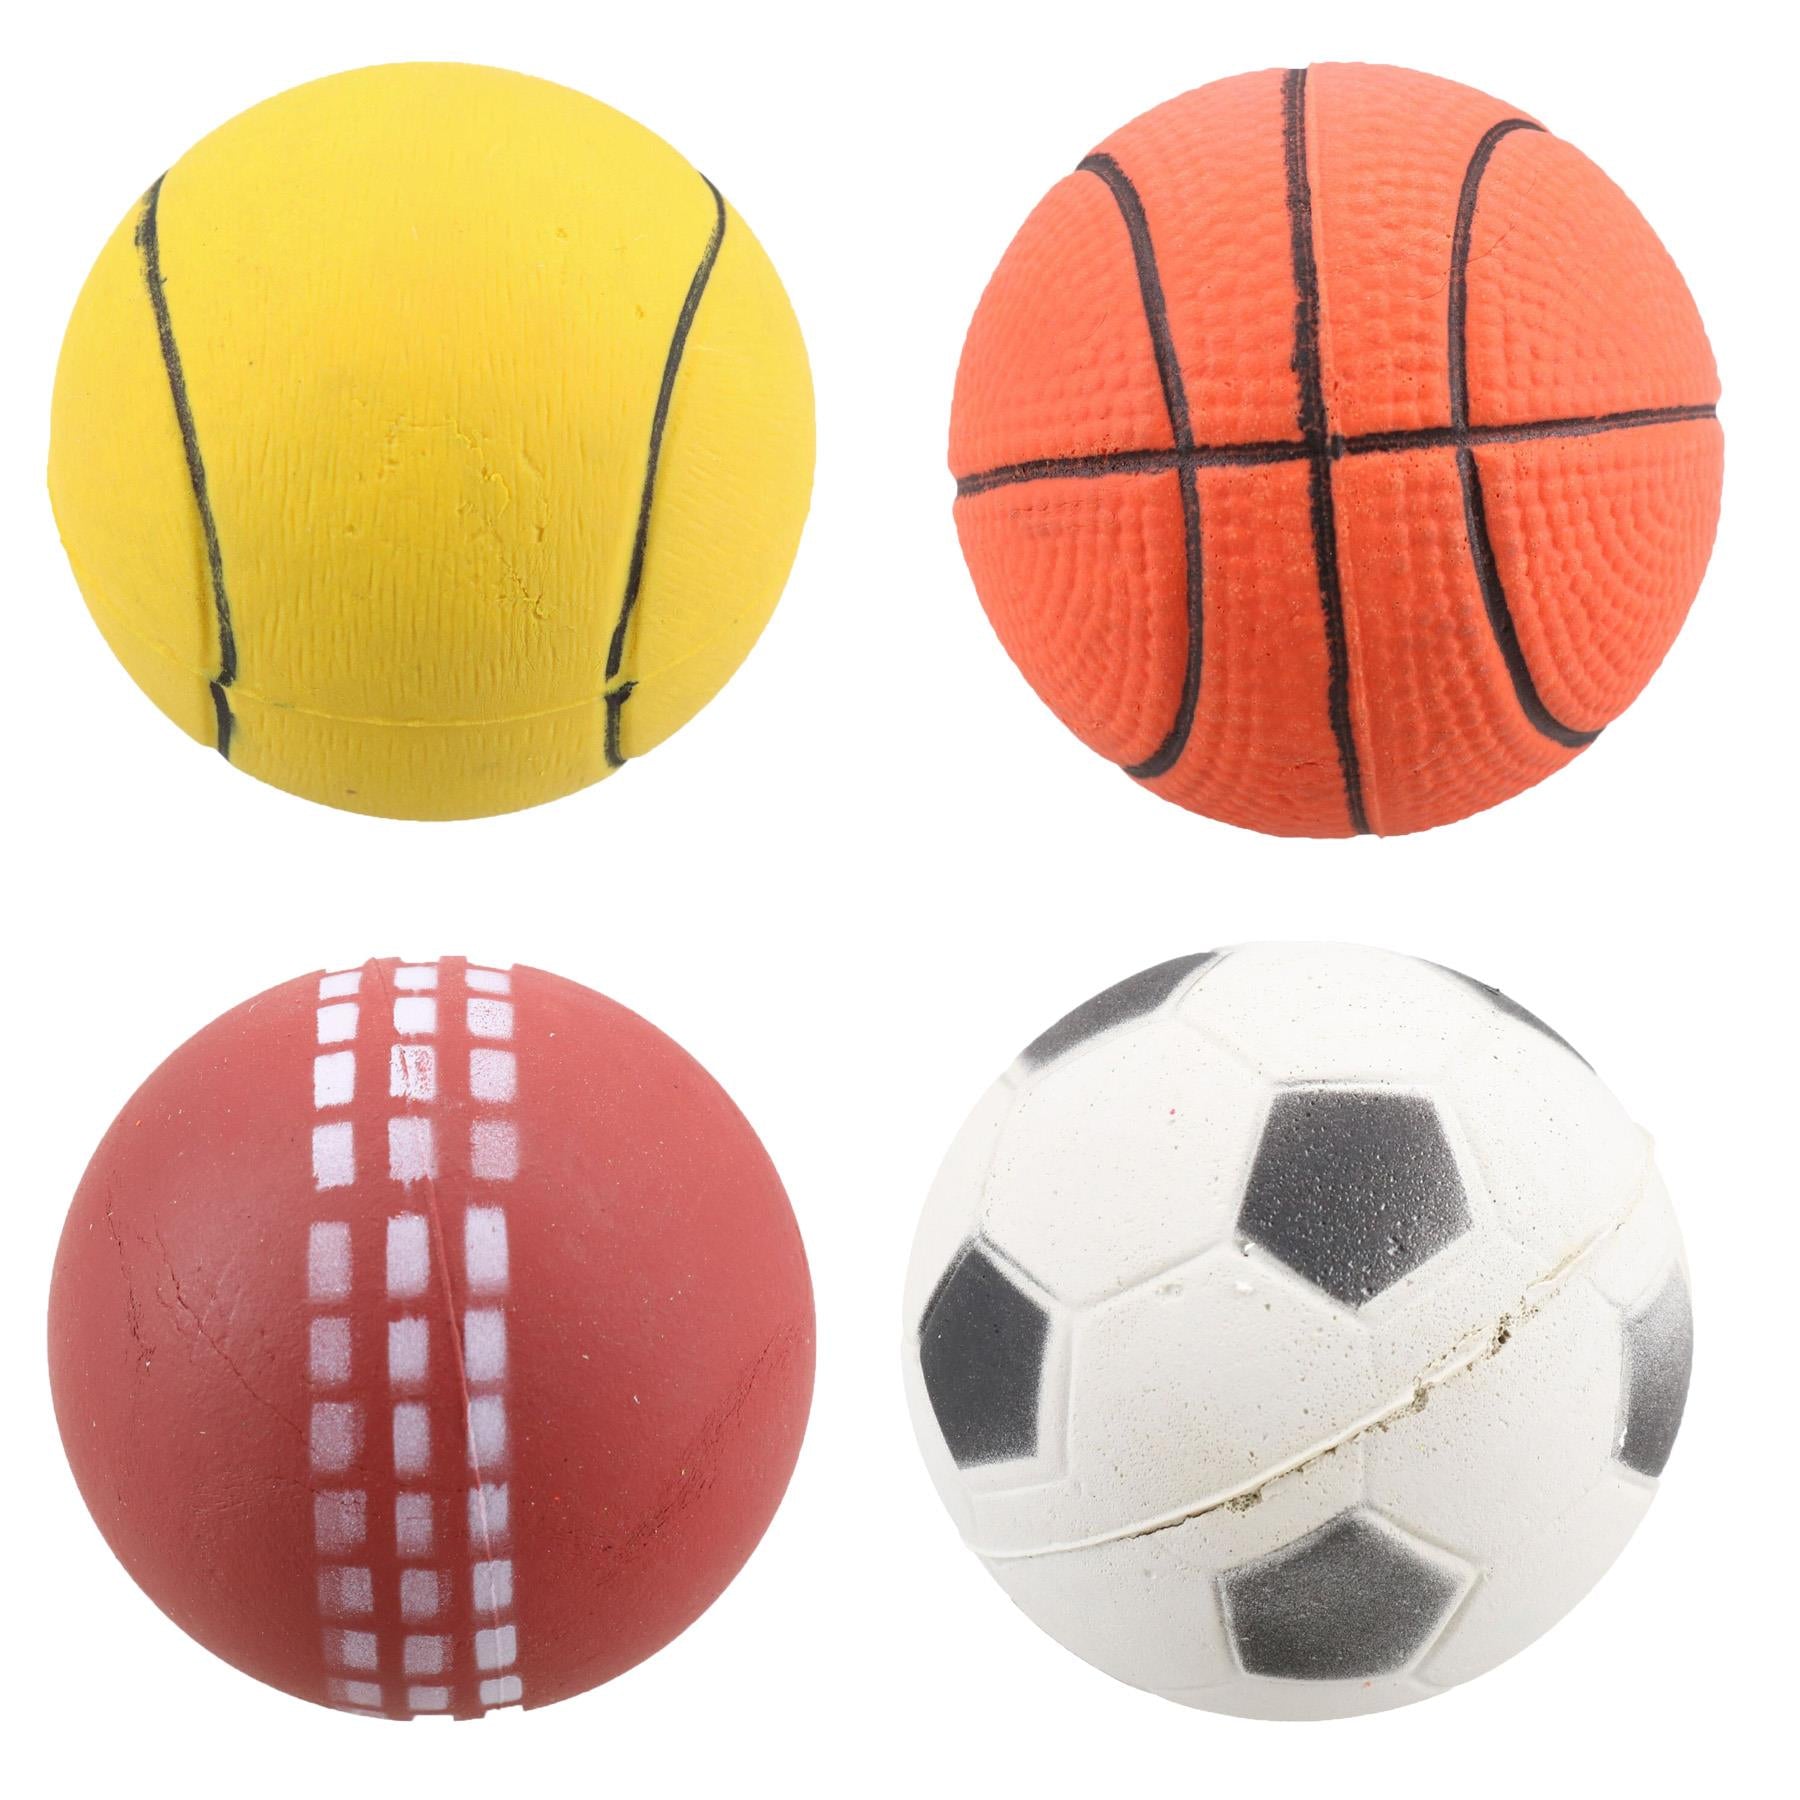 Dog Puppy Play Time Rubber Bouncy Small Sports Ball 6cm 4PK